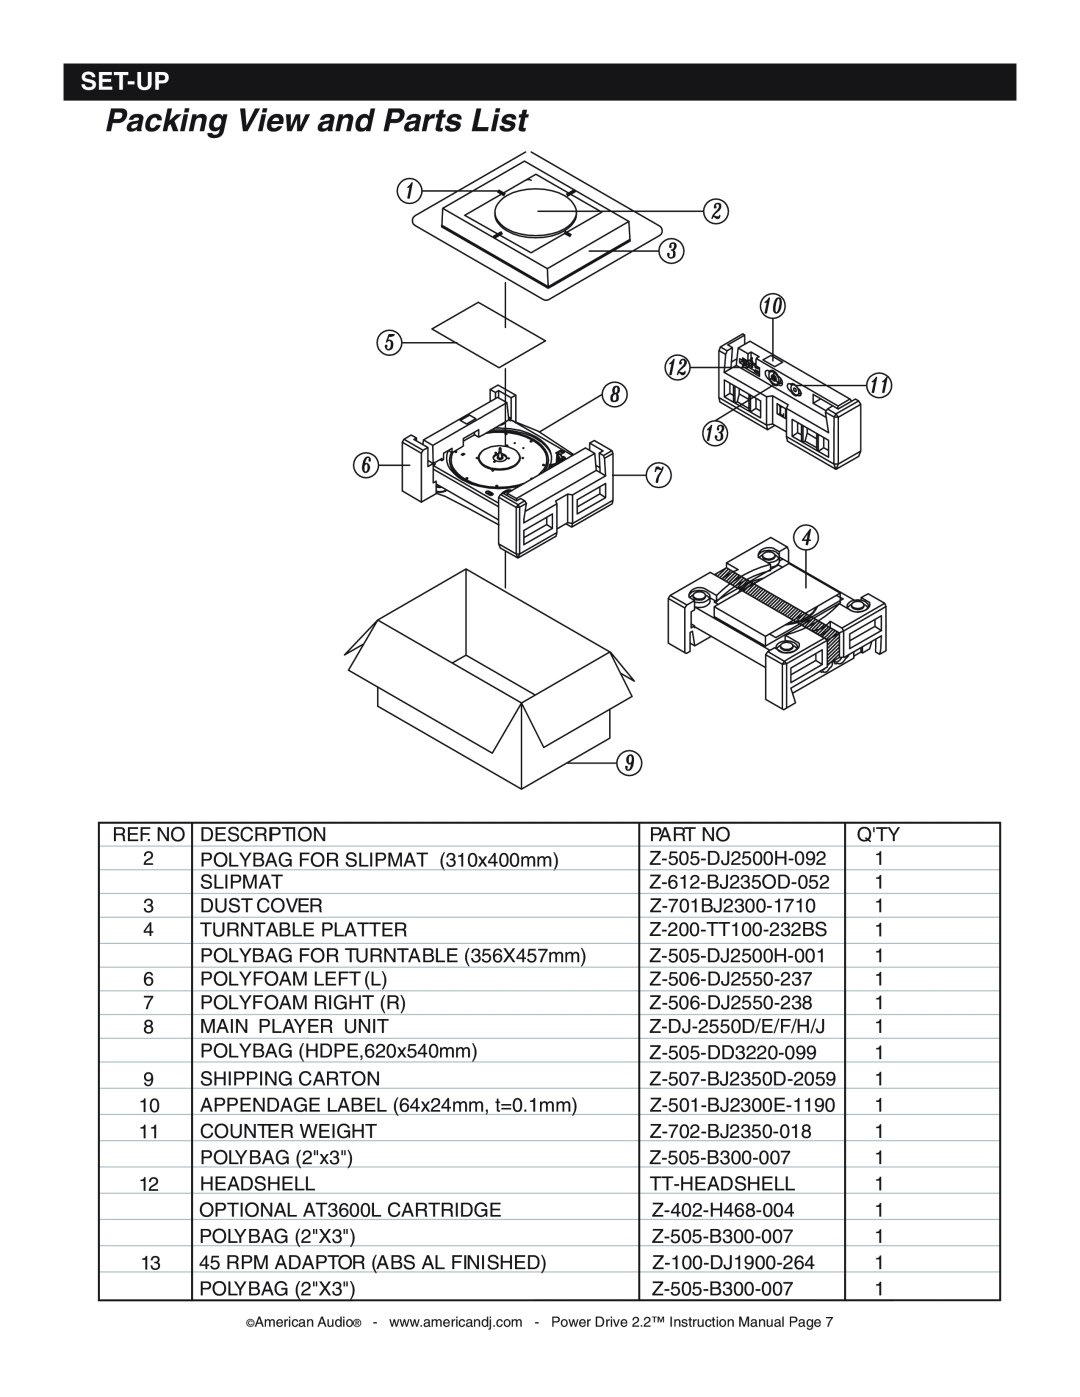 American Audio POWERDRIVE22.pdf manual Set-Up, Packing View and Parts List 